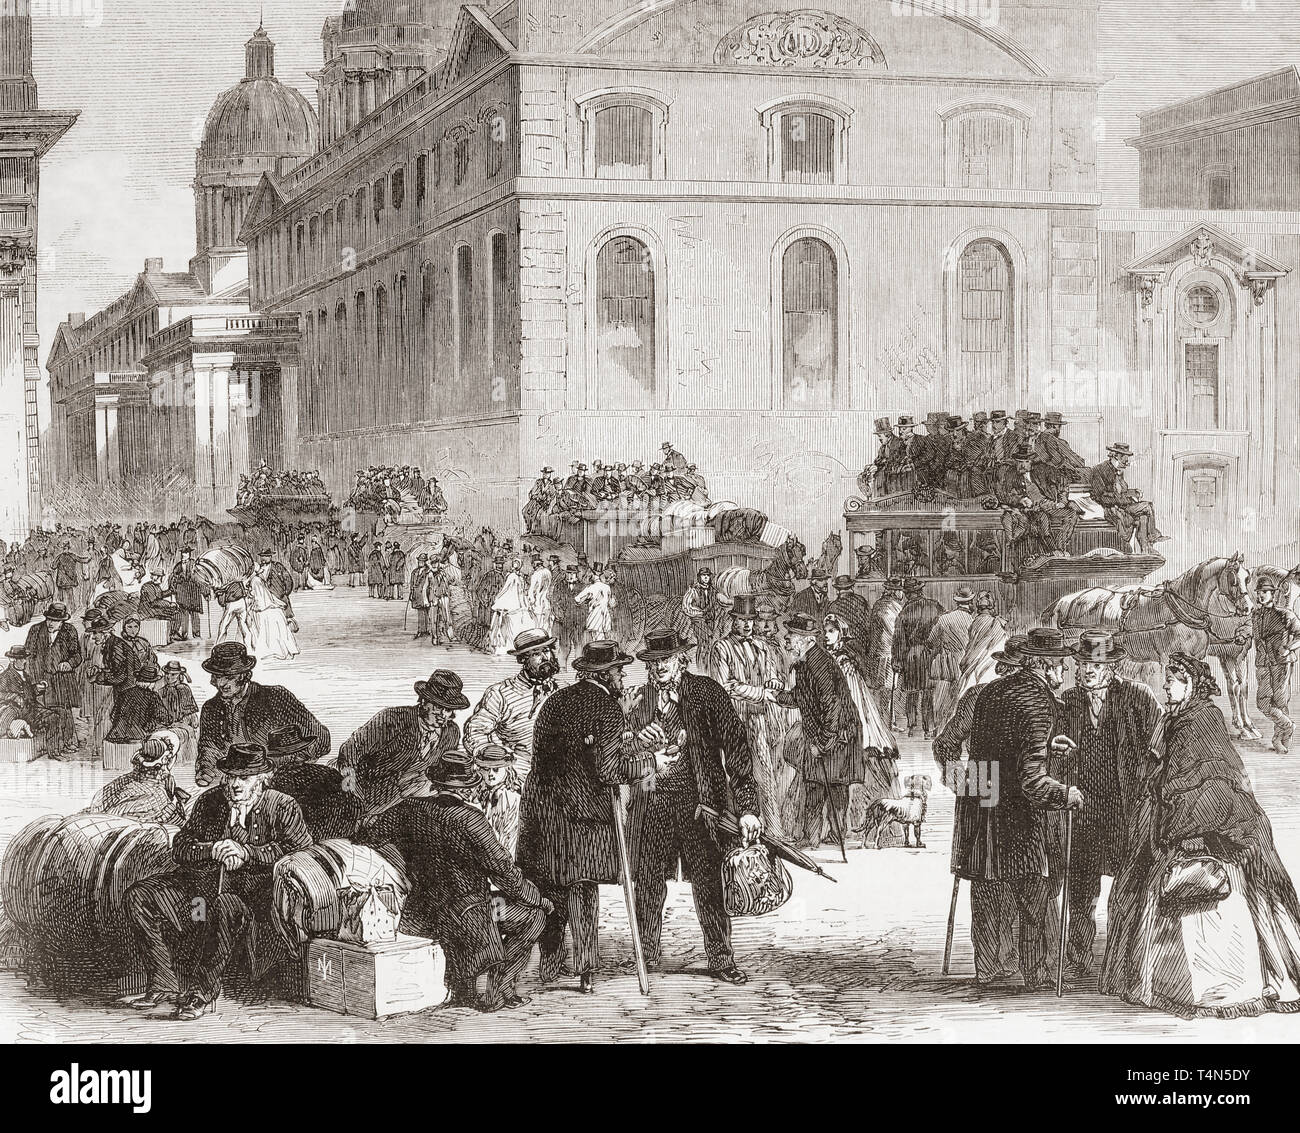 Pensioners leaving the Greenwich hospital.  The Greenwich Hospital was a permanent home for retired sailors of the Royal Navy, which operated from 1692 to 1869.  From The Illustrated London News, published 1865. Stock Photo